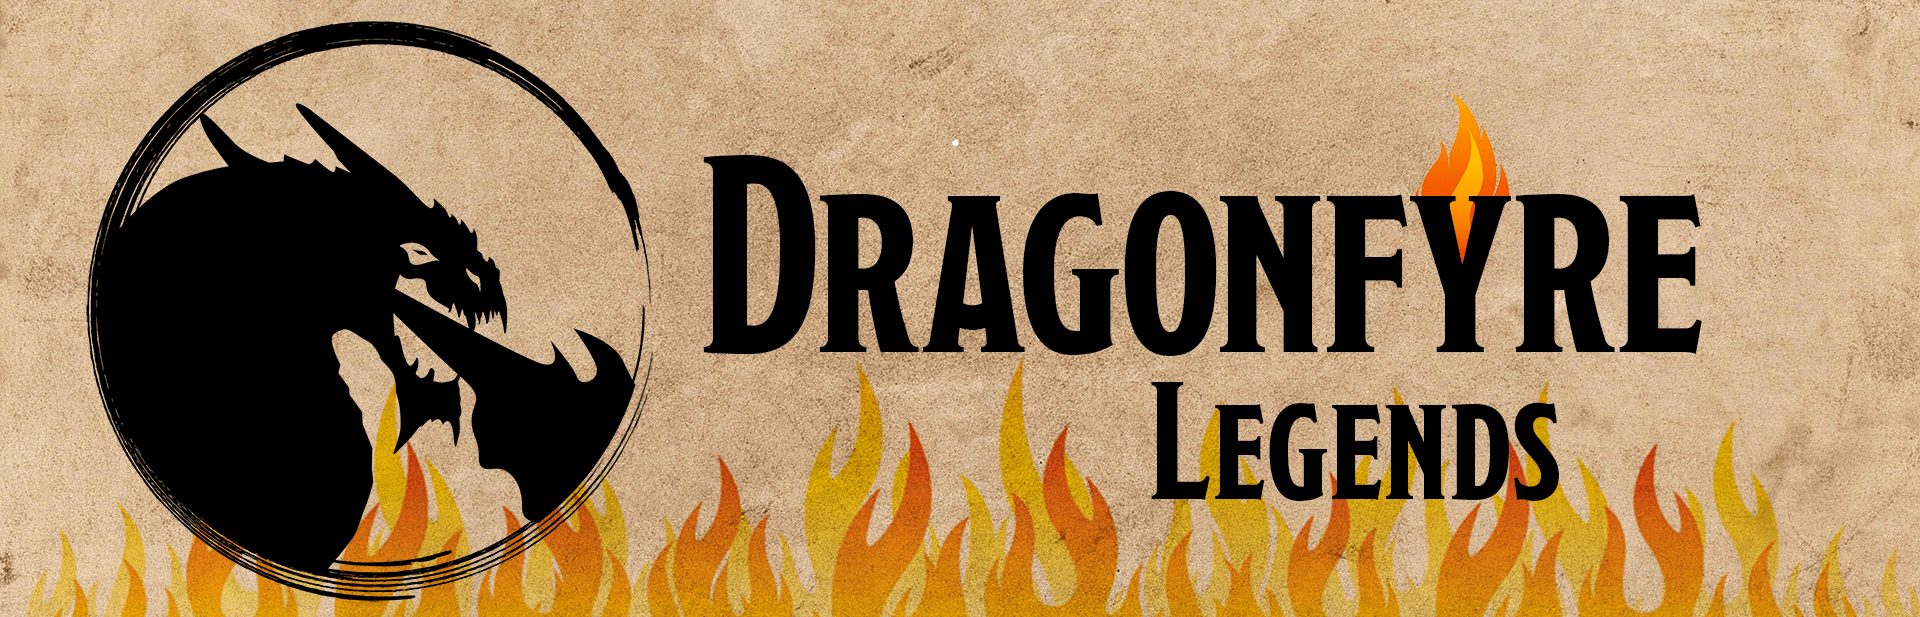 Dragonfyre Legends, the home of DnD streaming goodness